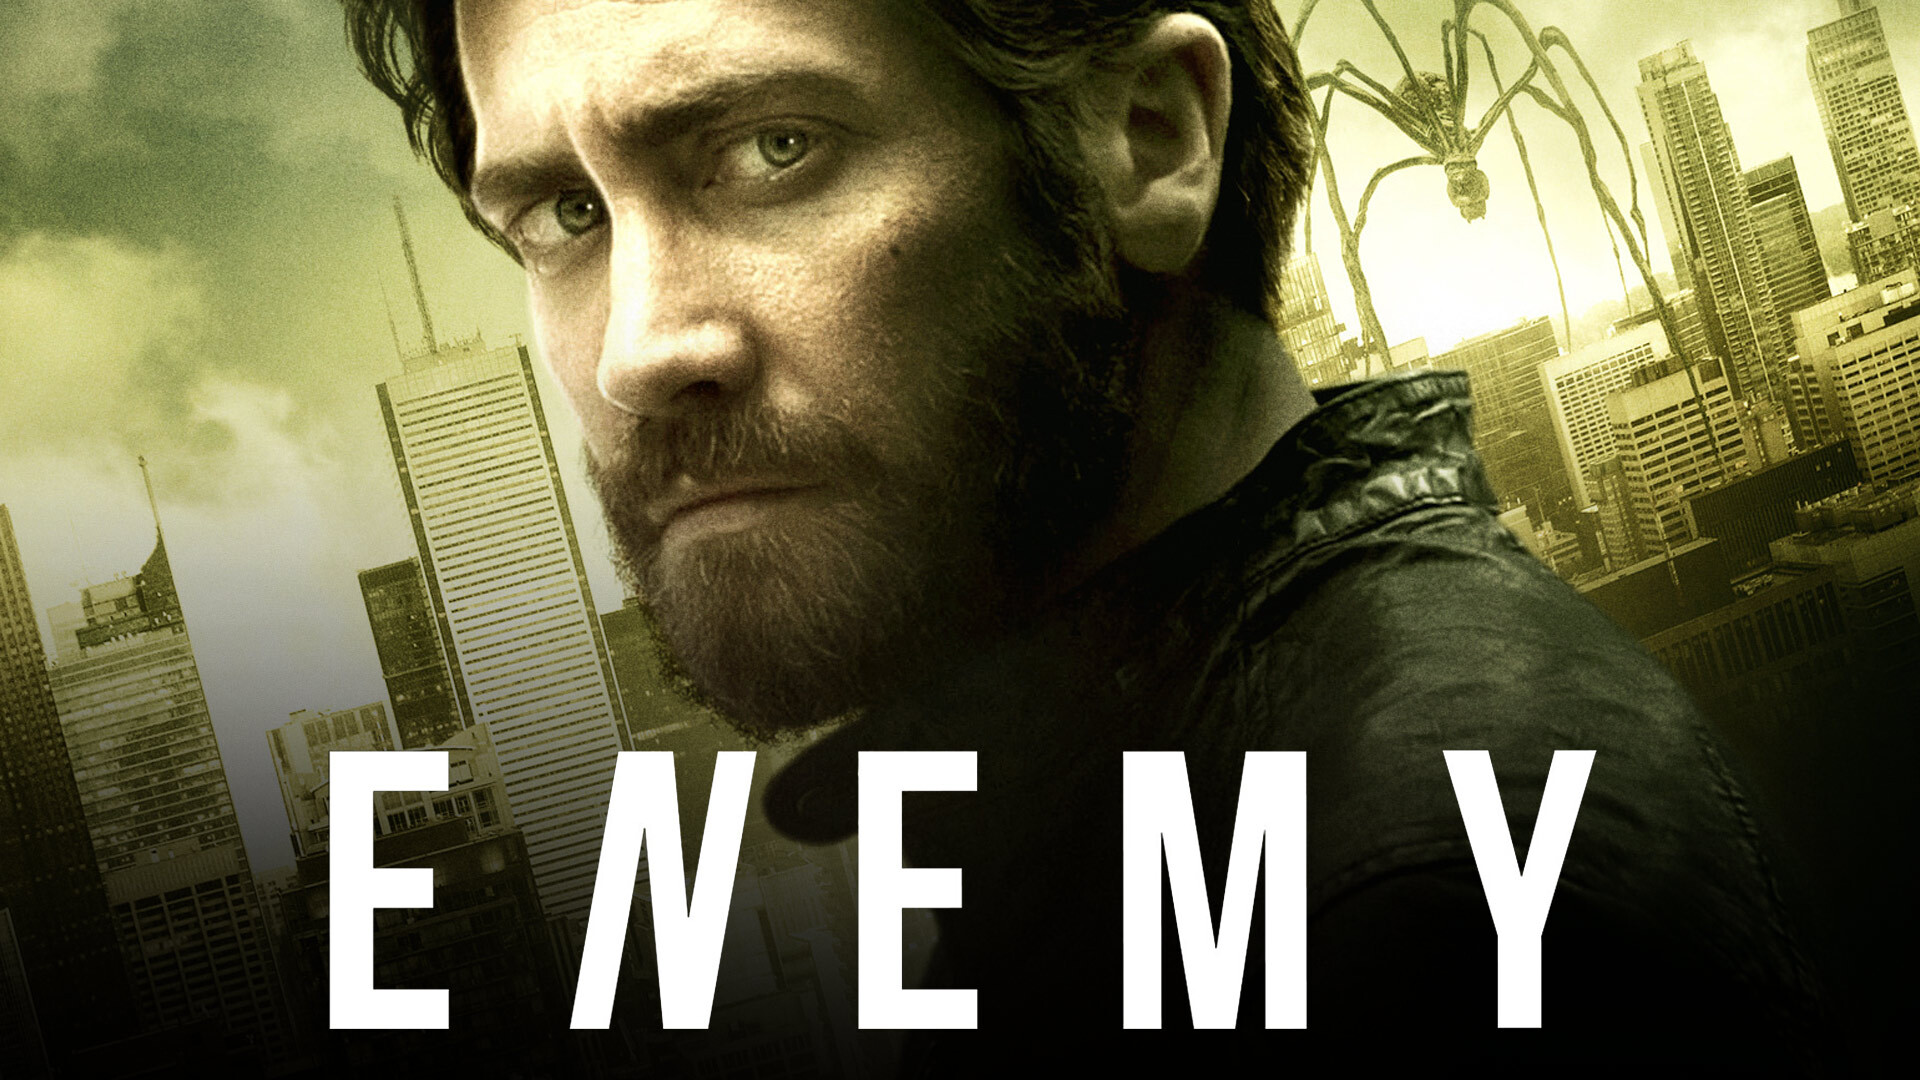 Enemy (Movie 2013): A 2013 film directed by Denis Villeneuve, Different in personality, Twins, Mysterious story. 1920x1080 Full HD Wallpaper.